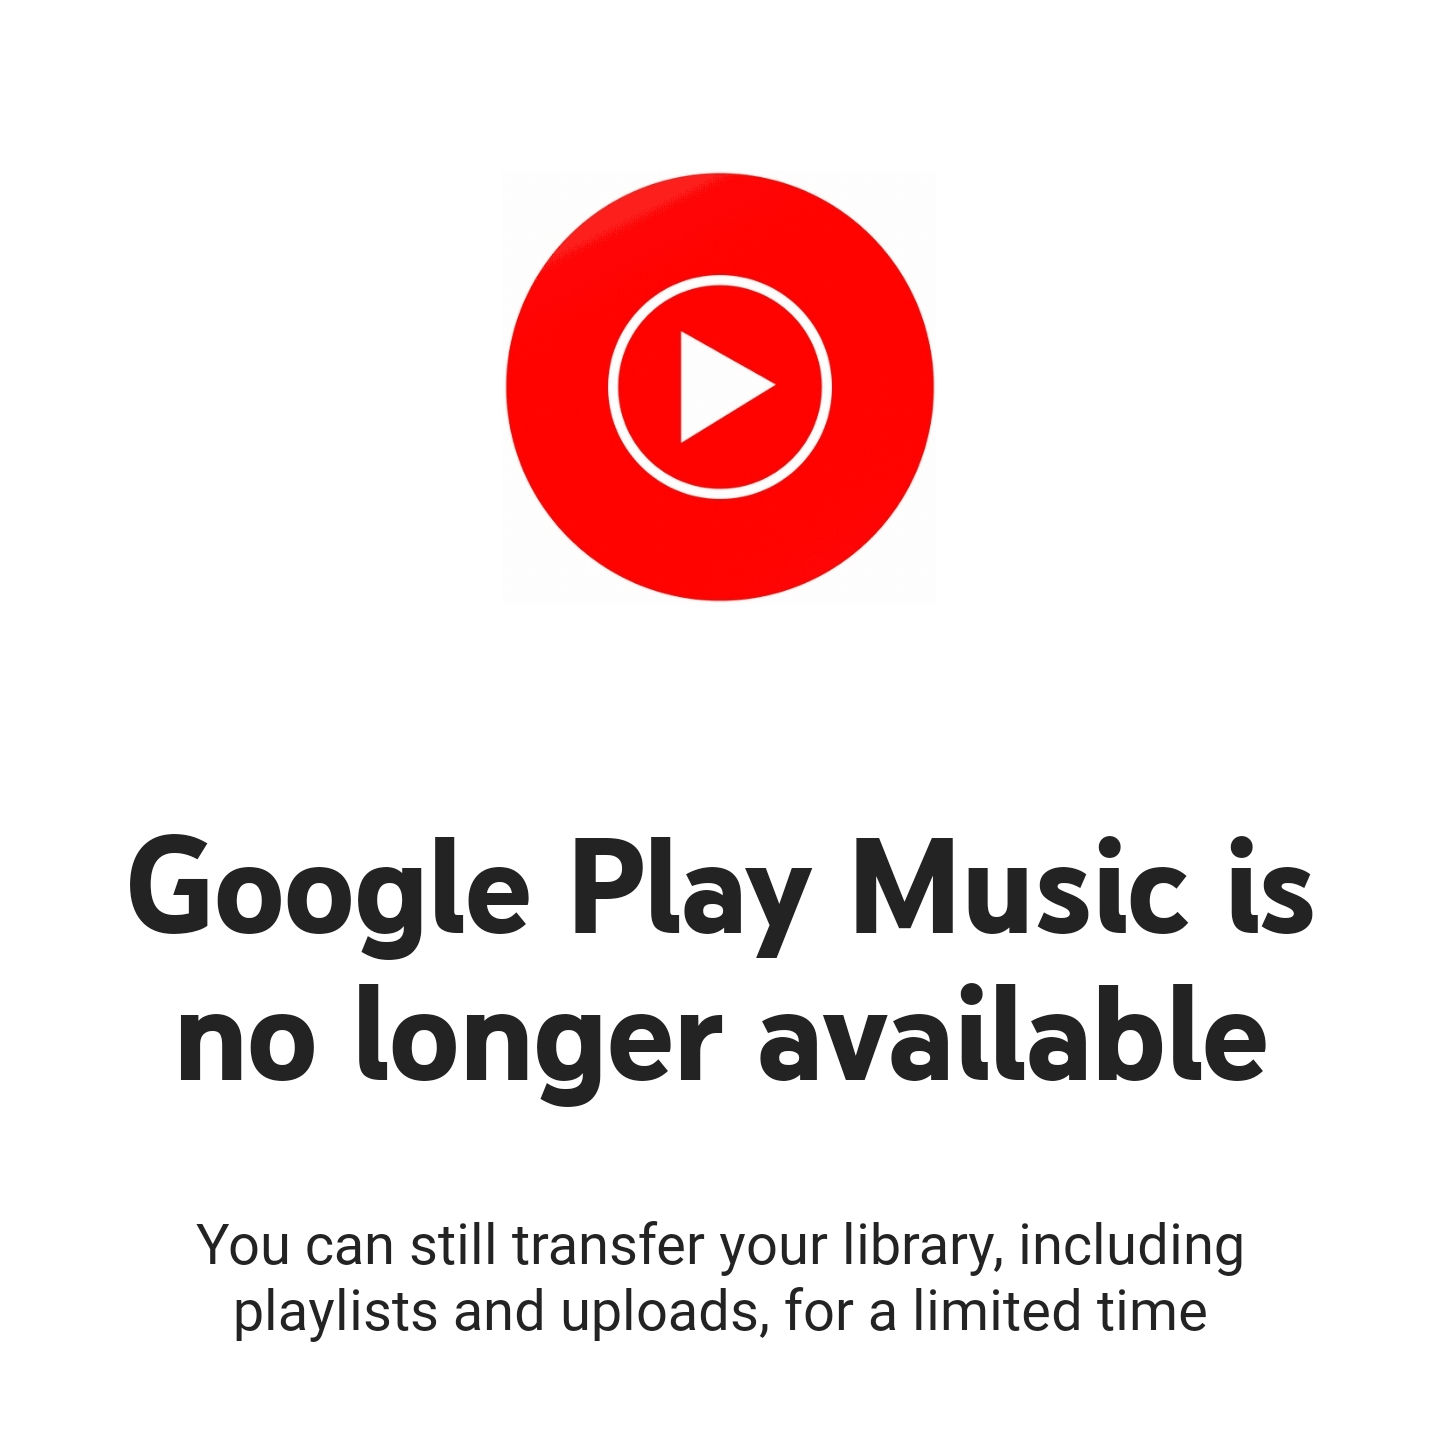 Google Play Music music exit. VOX enters the scene!